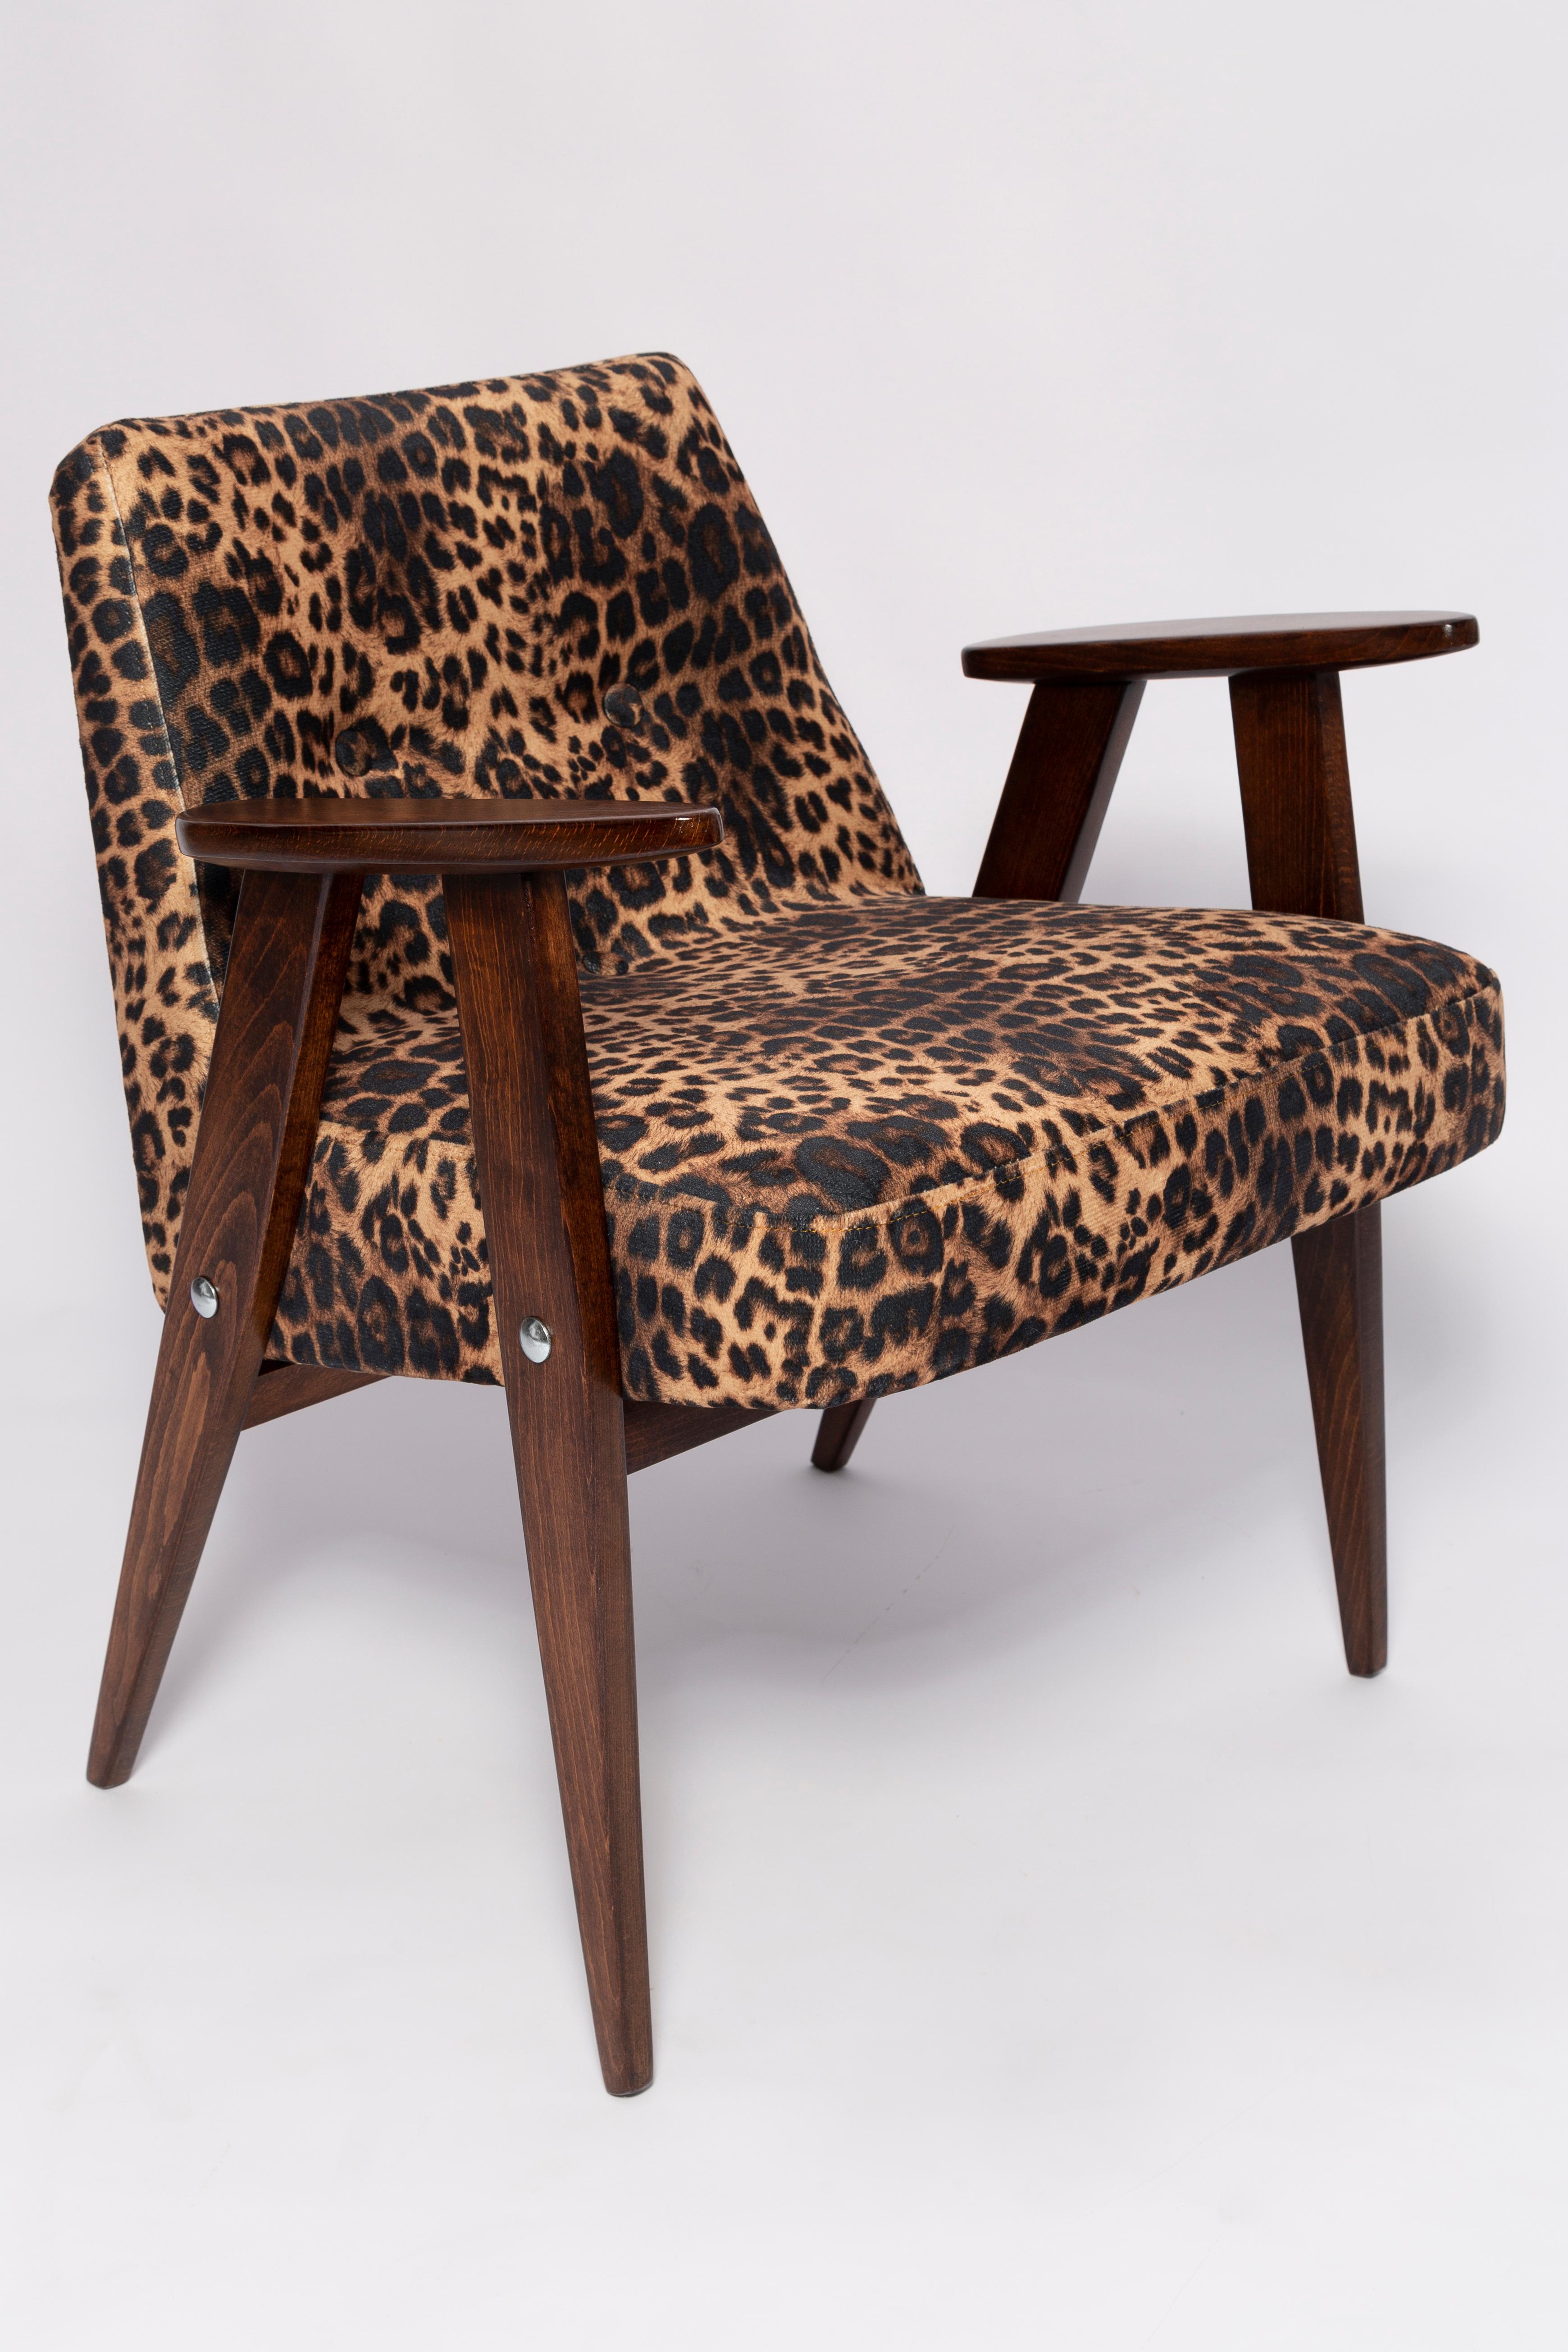 Polish Two Midcentury 366 Armchairs in Leopard Print Velvet, Jozef Chierowski, 1960s For Sale